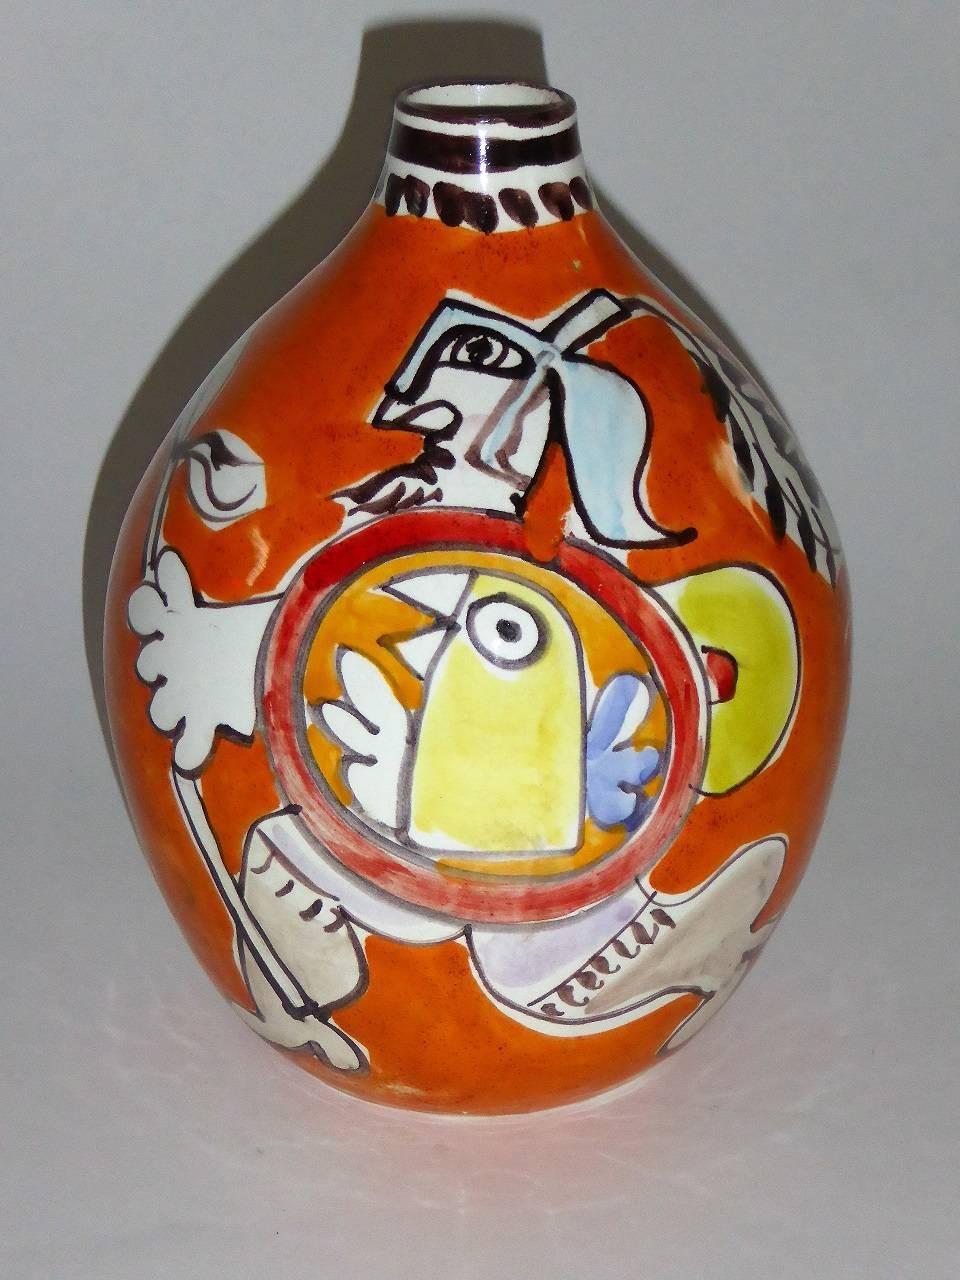 DeSimone pottery vase from the 1960s vividly hand-painted underglaze with two gladiators or Roman warriors with swords drawn, plumed helmets and shields with roosters depicted. Signed on the side underglaze. Great 9 3/4 inches size, 8 inches in